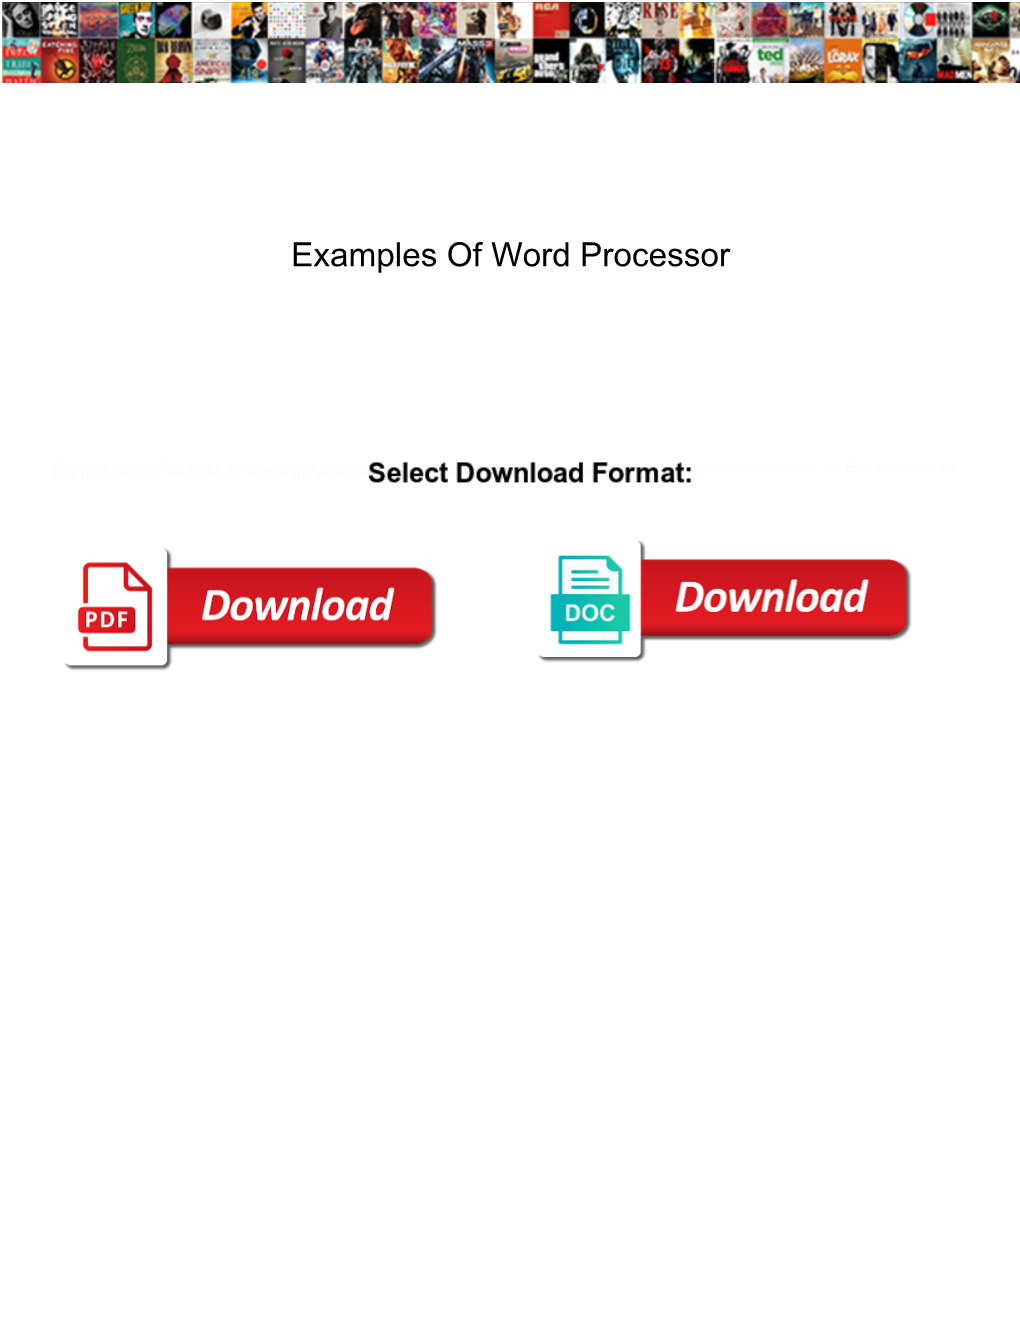 Examples of Word Processor